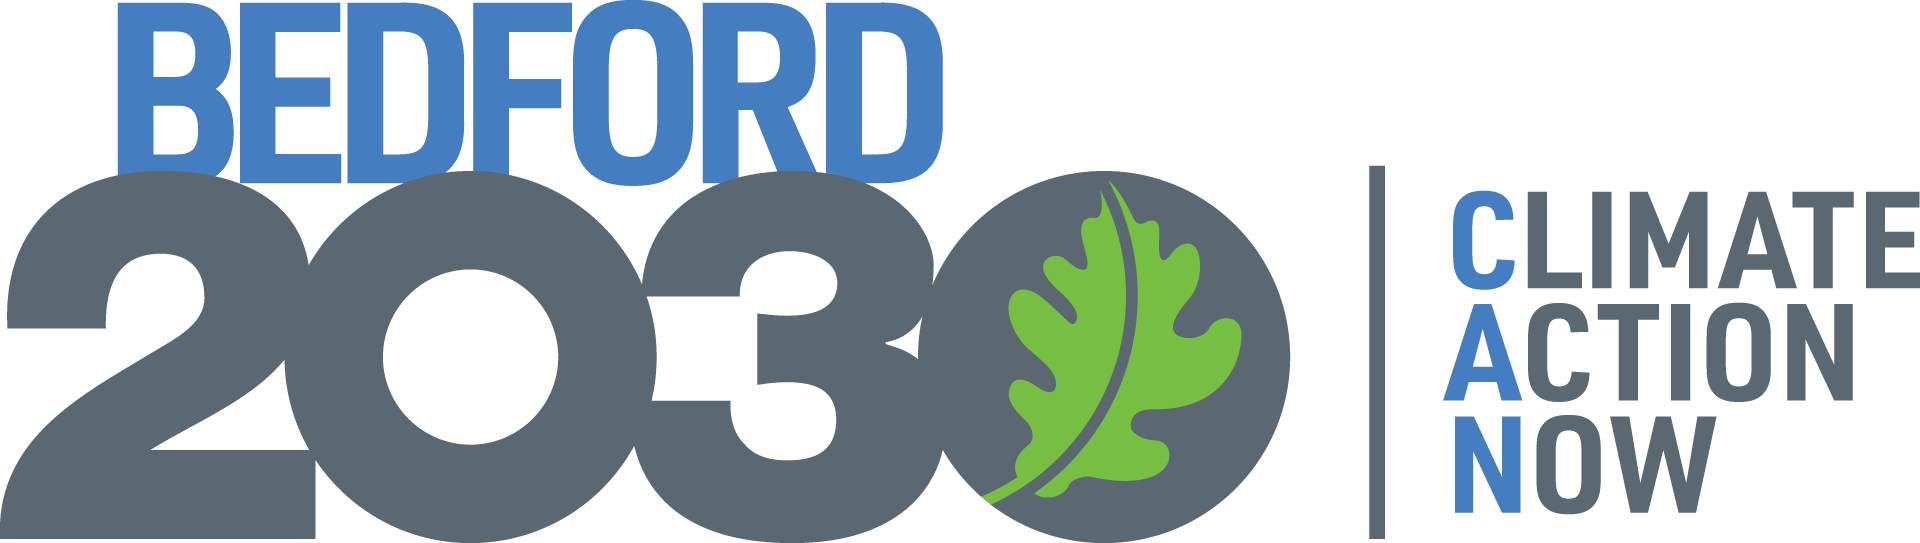 Bedford 2030 Climate Action Now logo